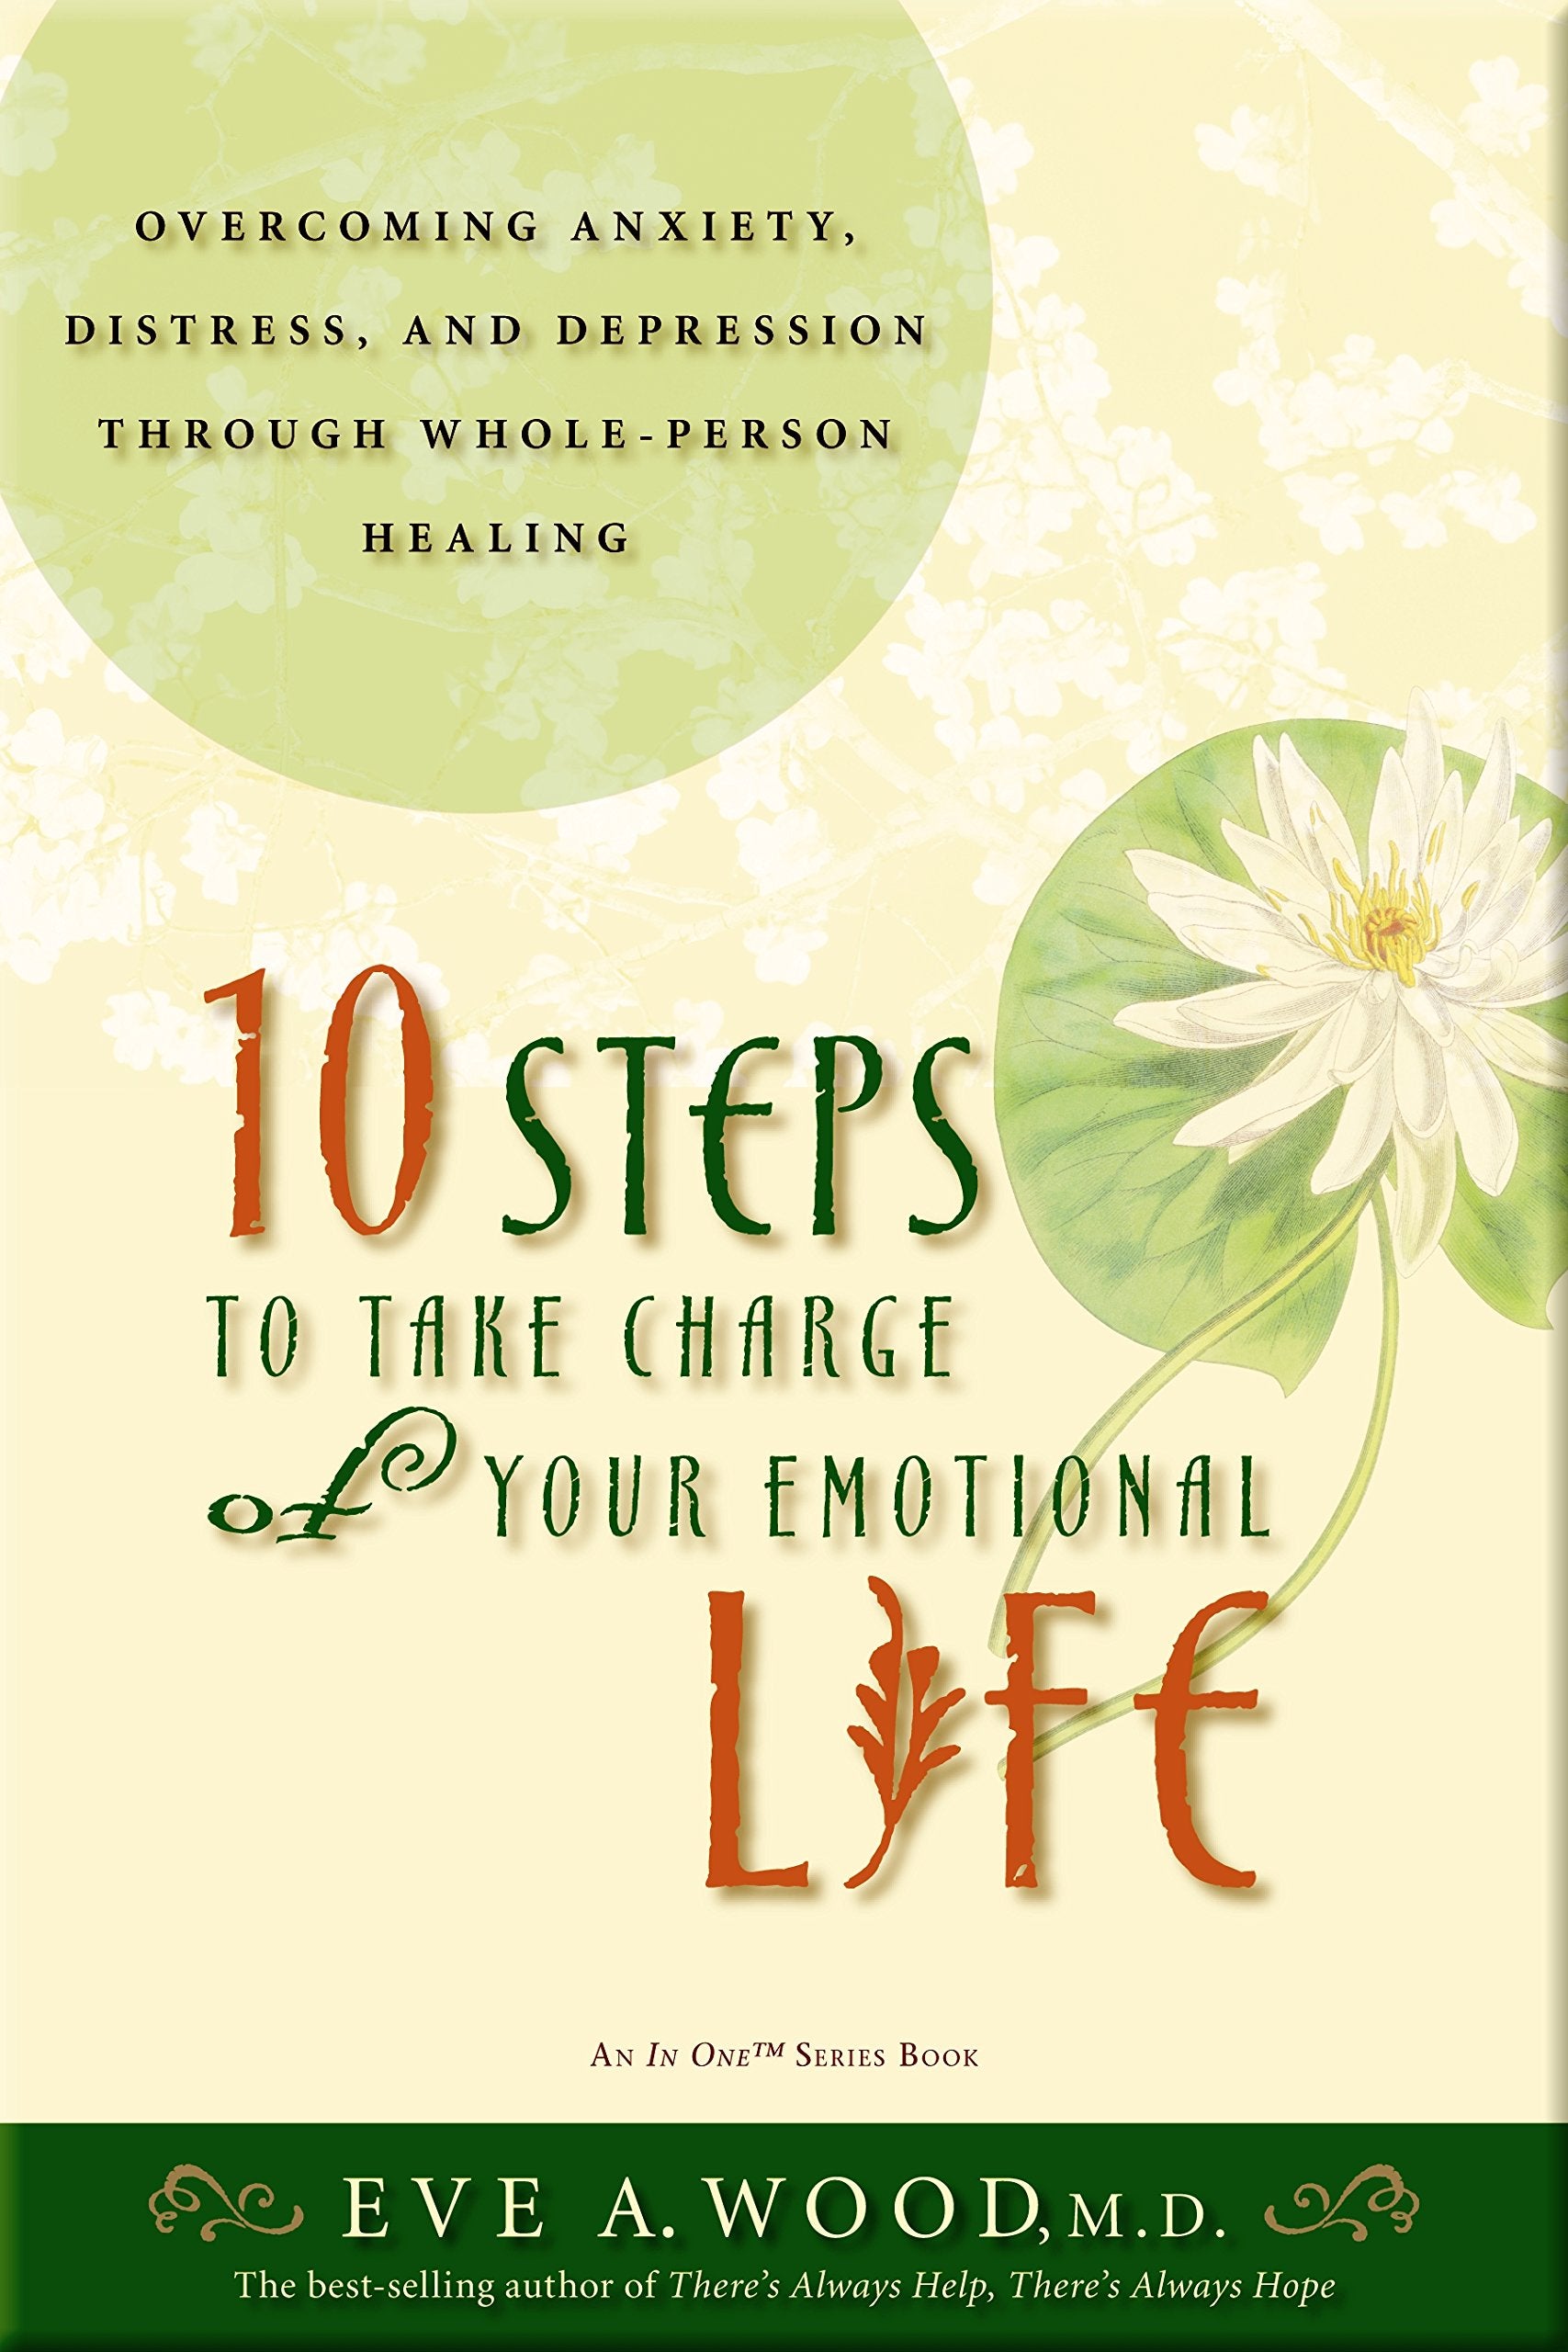 Livre ISBN 1401911226 10 Steps to Take Charge of Your Emotional Life: Overcoming Anxiety, Distress, and Depression Through Whole-Person Healing (Eve A. Wood)